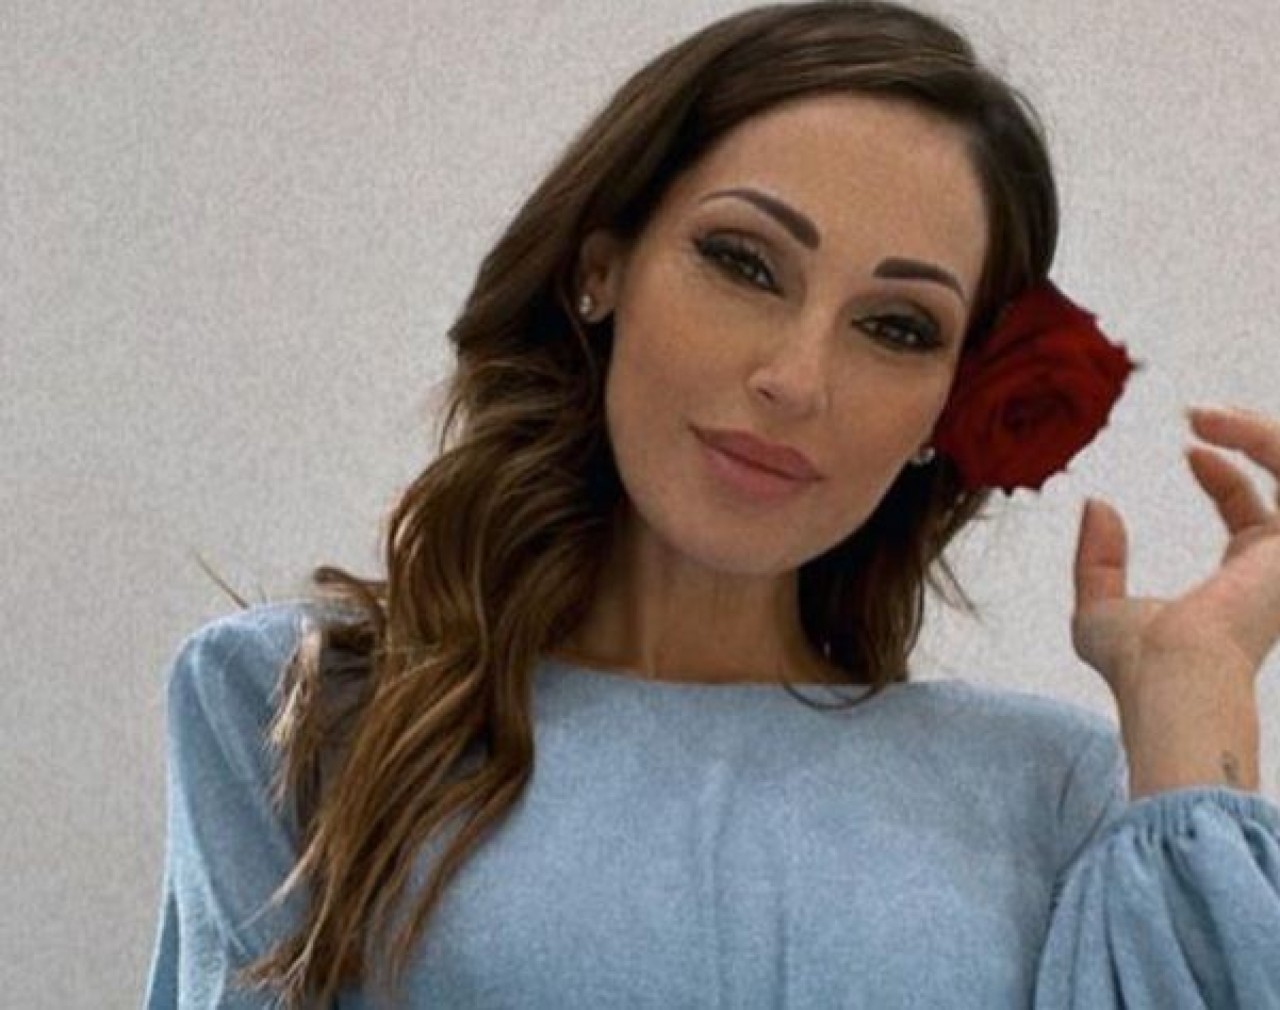 Anna Tatangelo compleanno